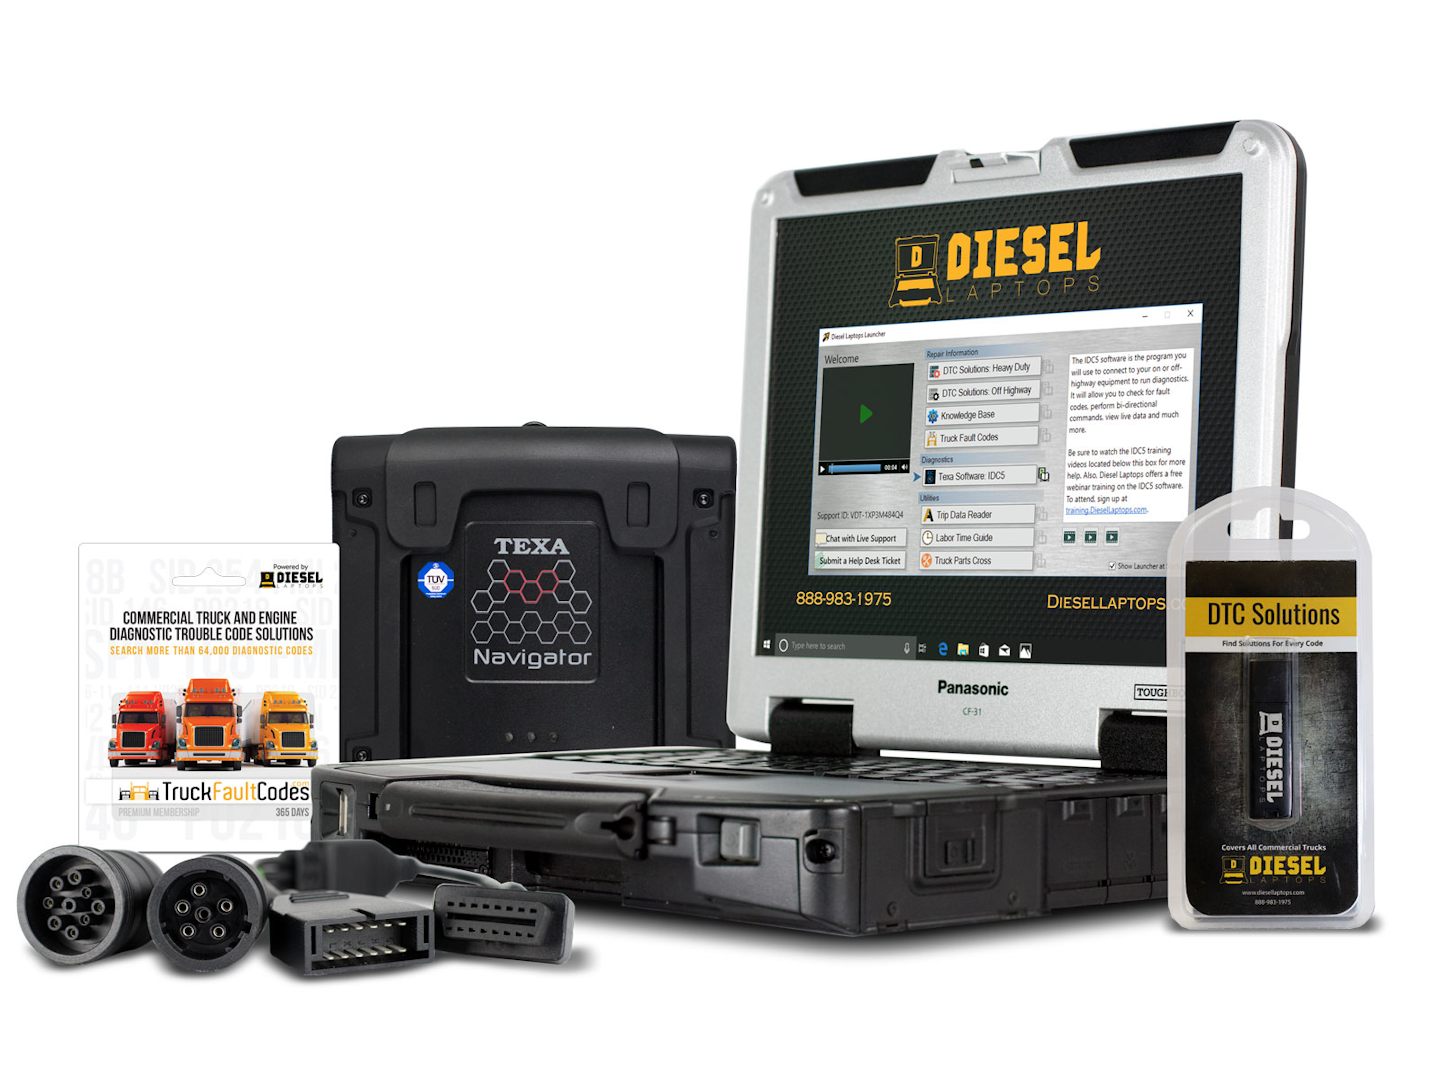 Tool Review: Diesel Laptops TEXA Truck Tool with Level 3 Support